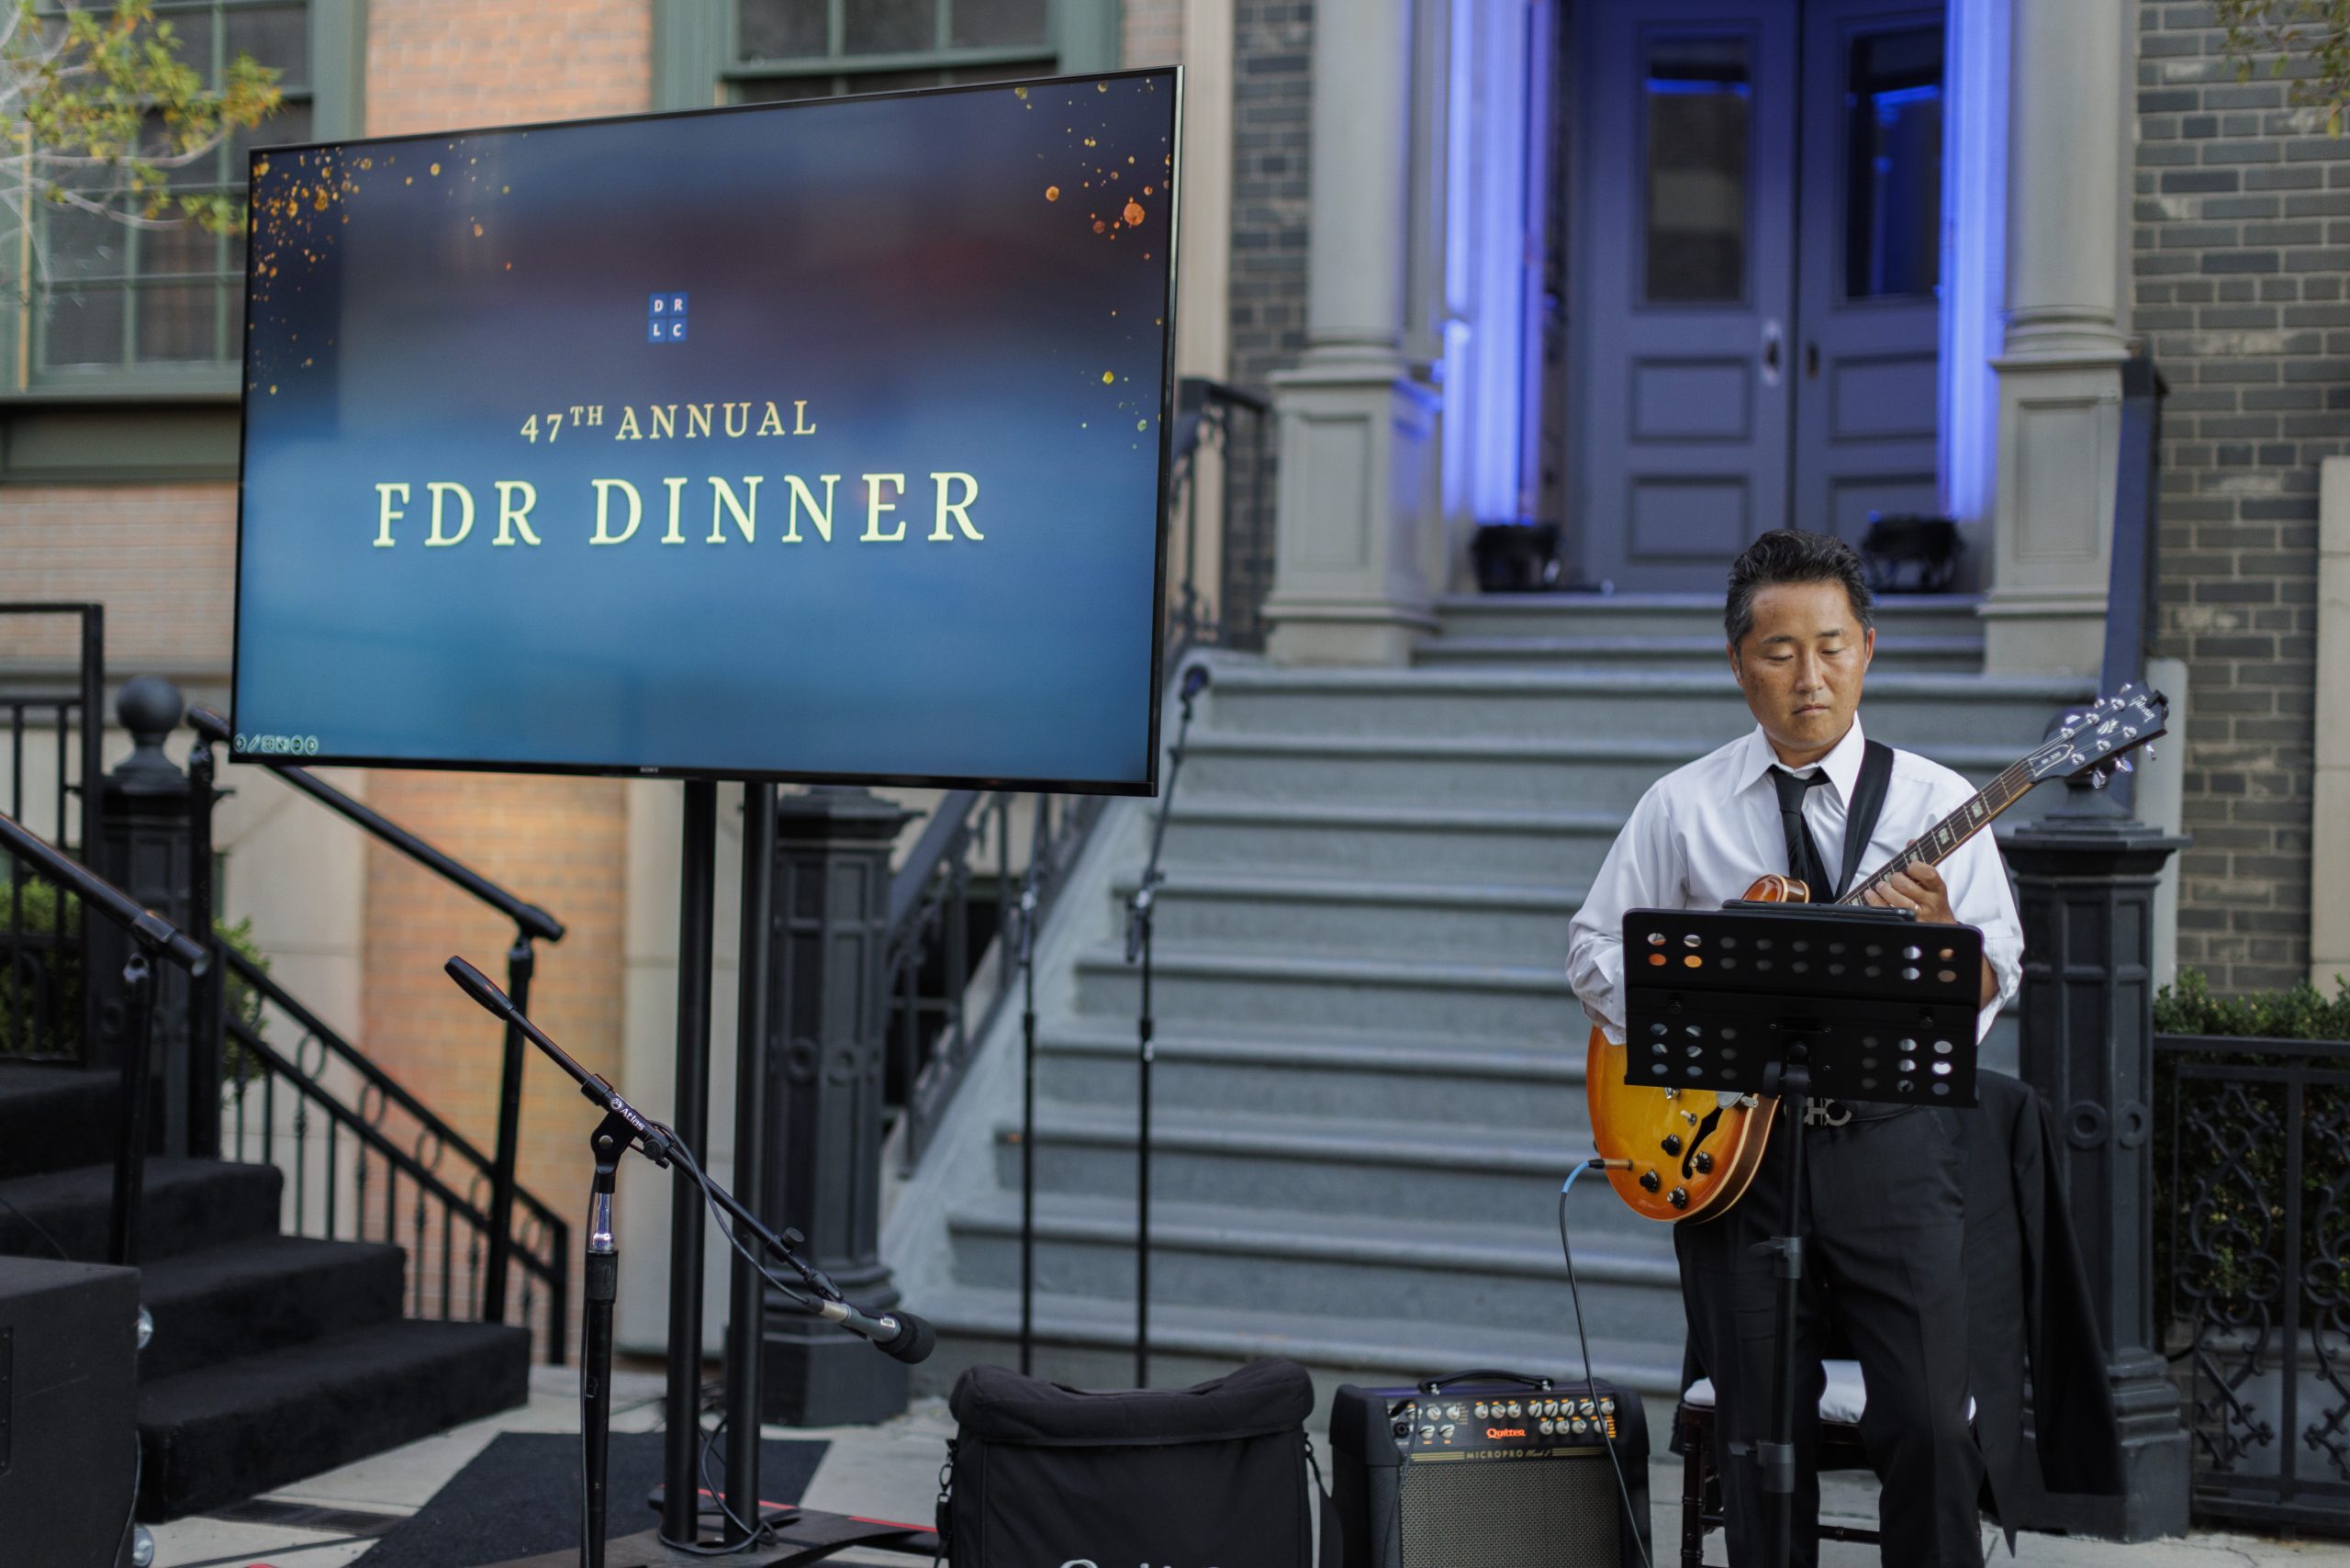 Candid shot of musician Gaku, playing guitar and standing to the left of a large monitor that reads "47th Annual FDR Dinner" with gold text on a blue background. Behind Gaku is a New York-style front stoop.